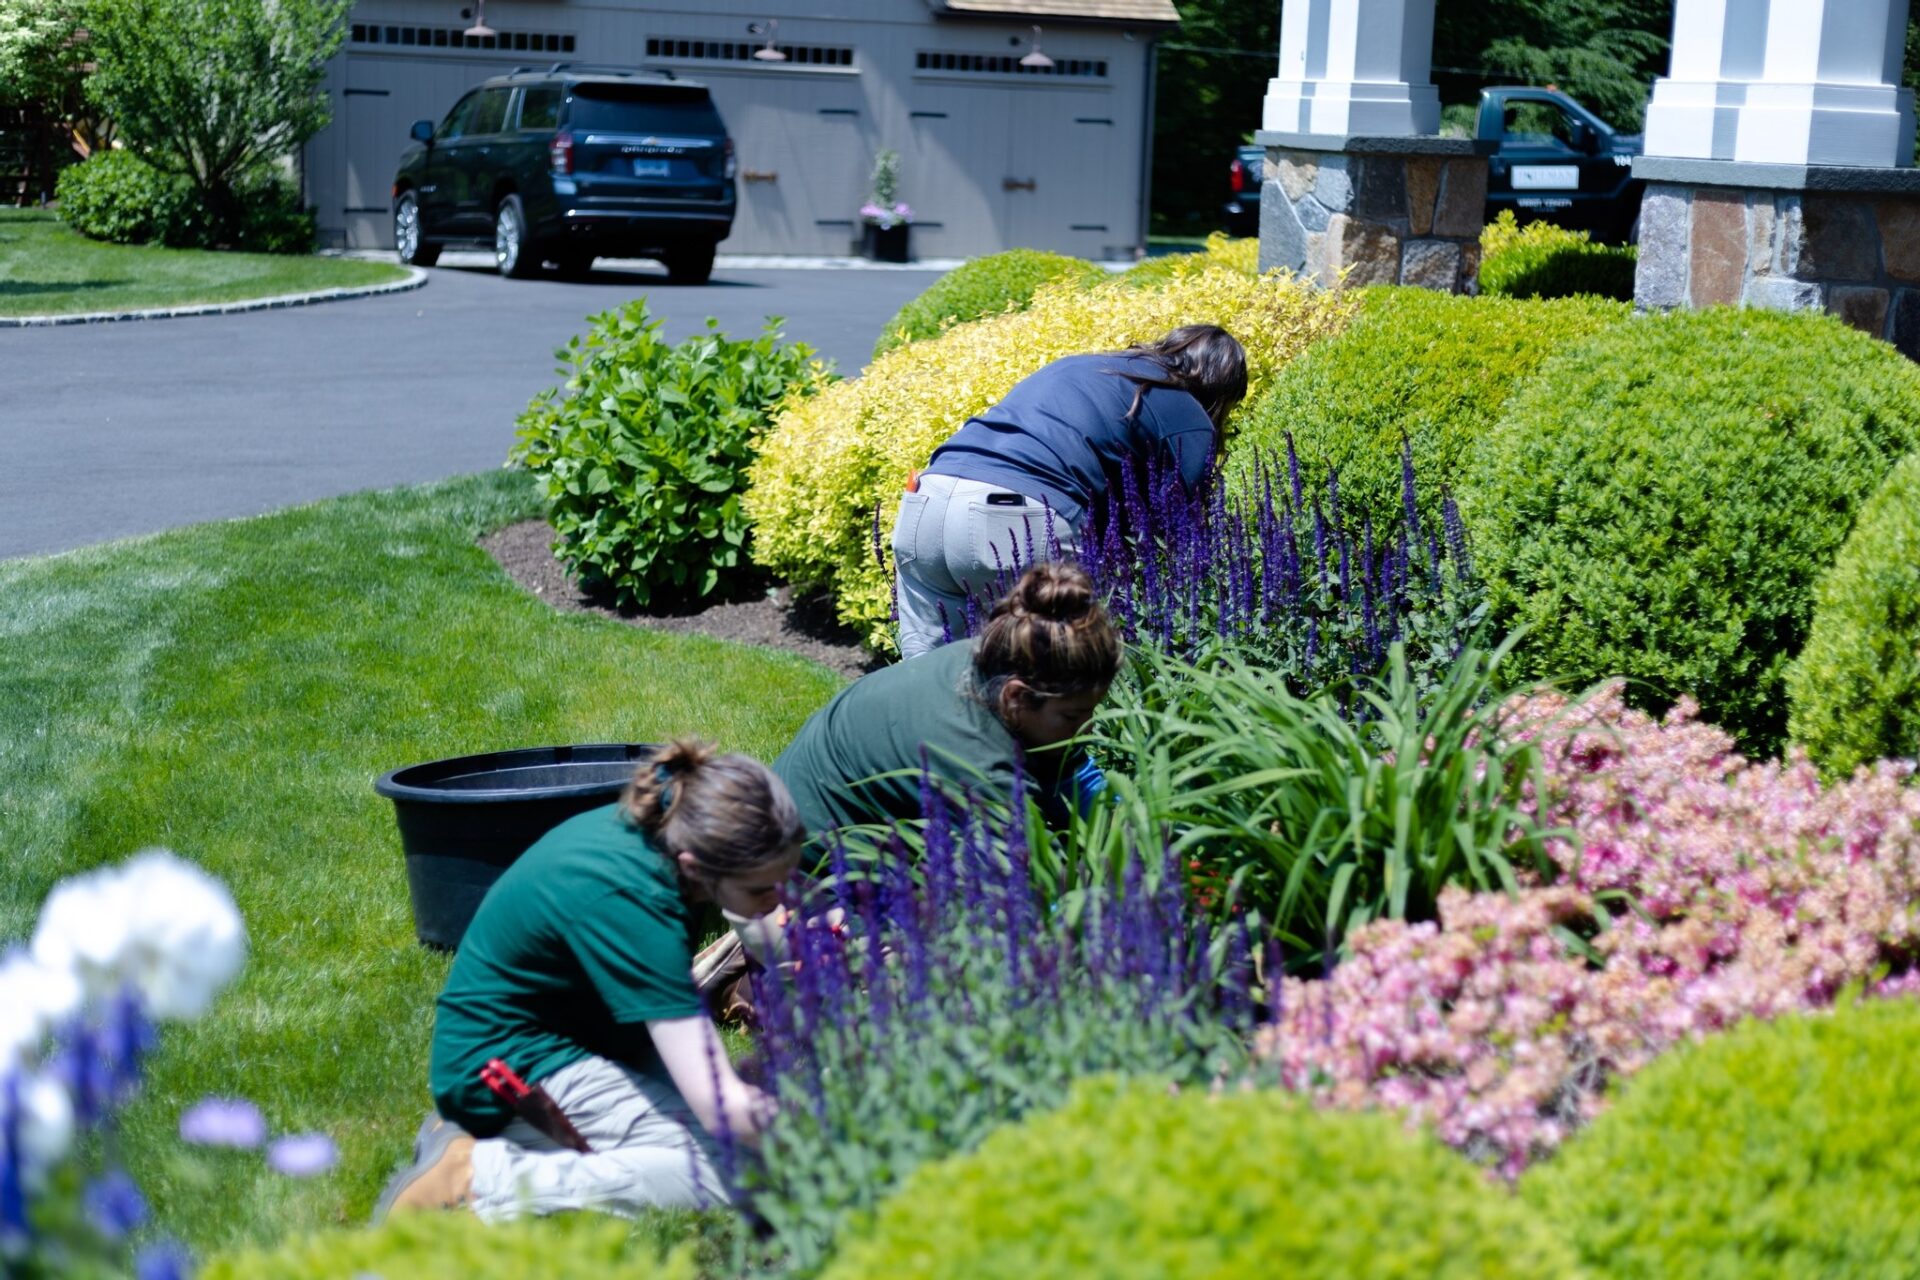 Three people are gardening in a well-maintained yard with lush greenery, colorful flowers, a black pot, and a residential background with vehicles.